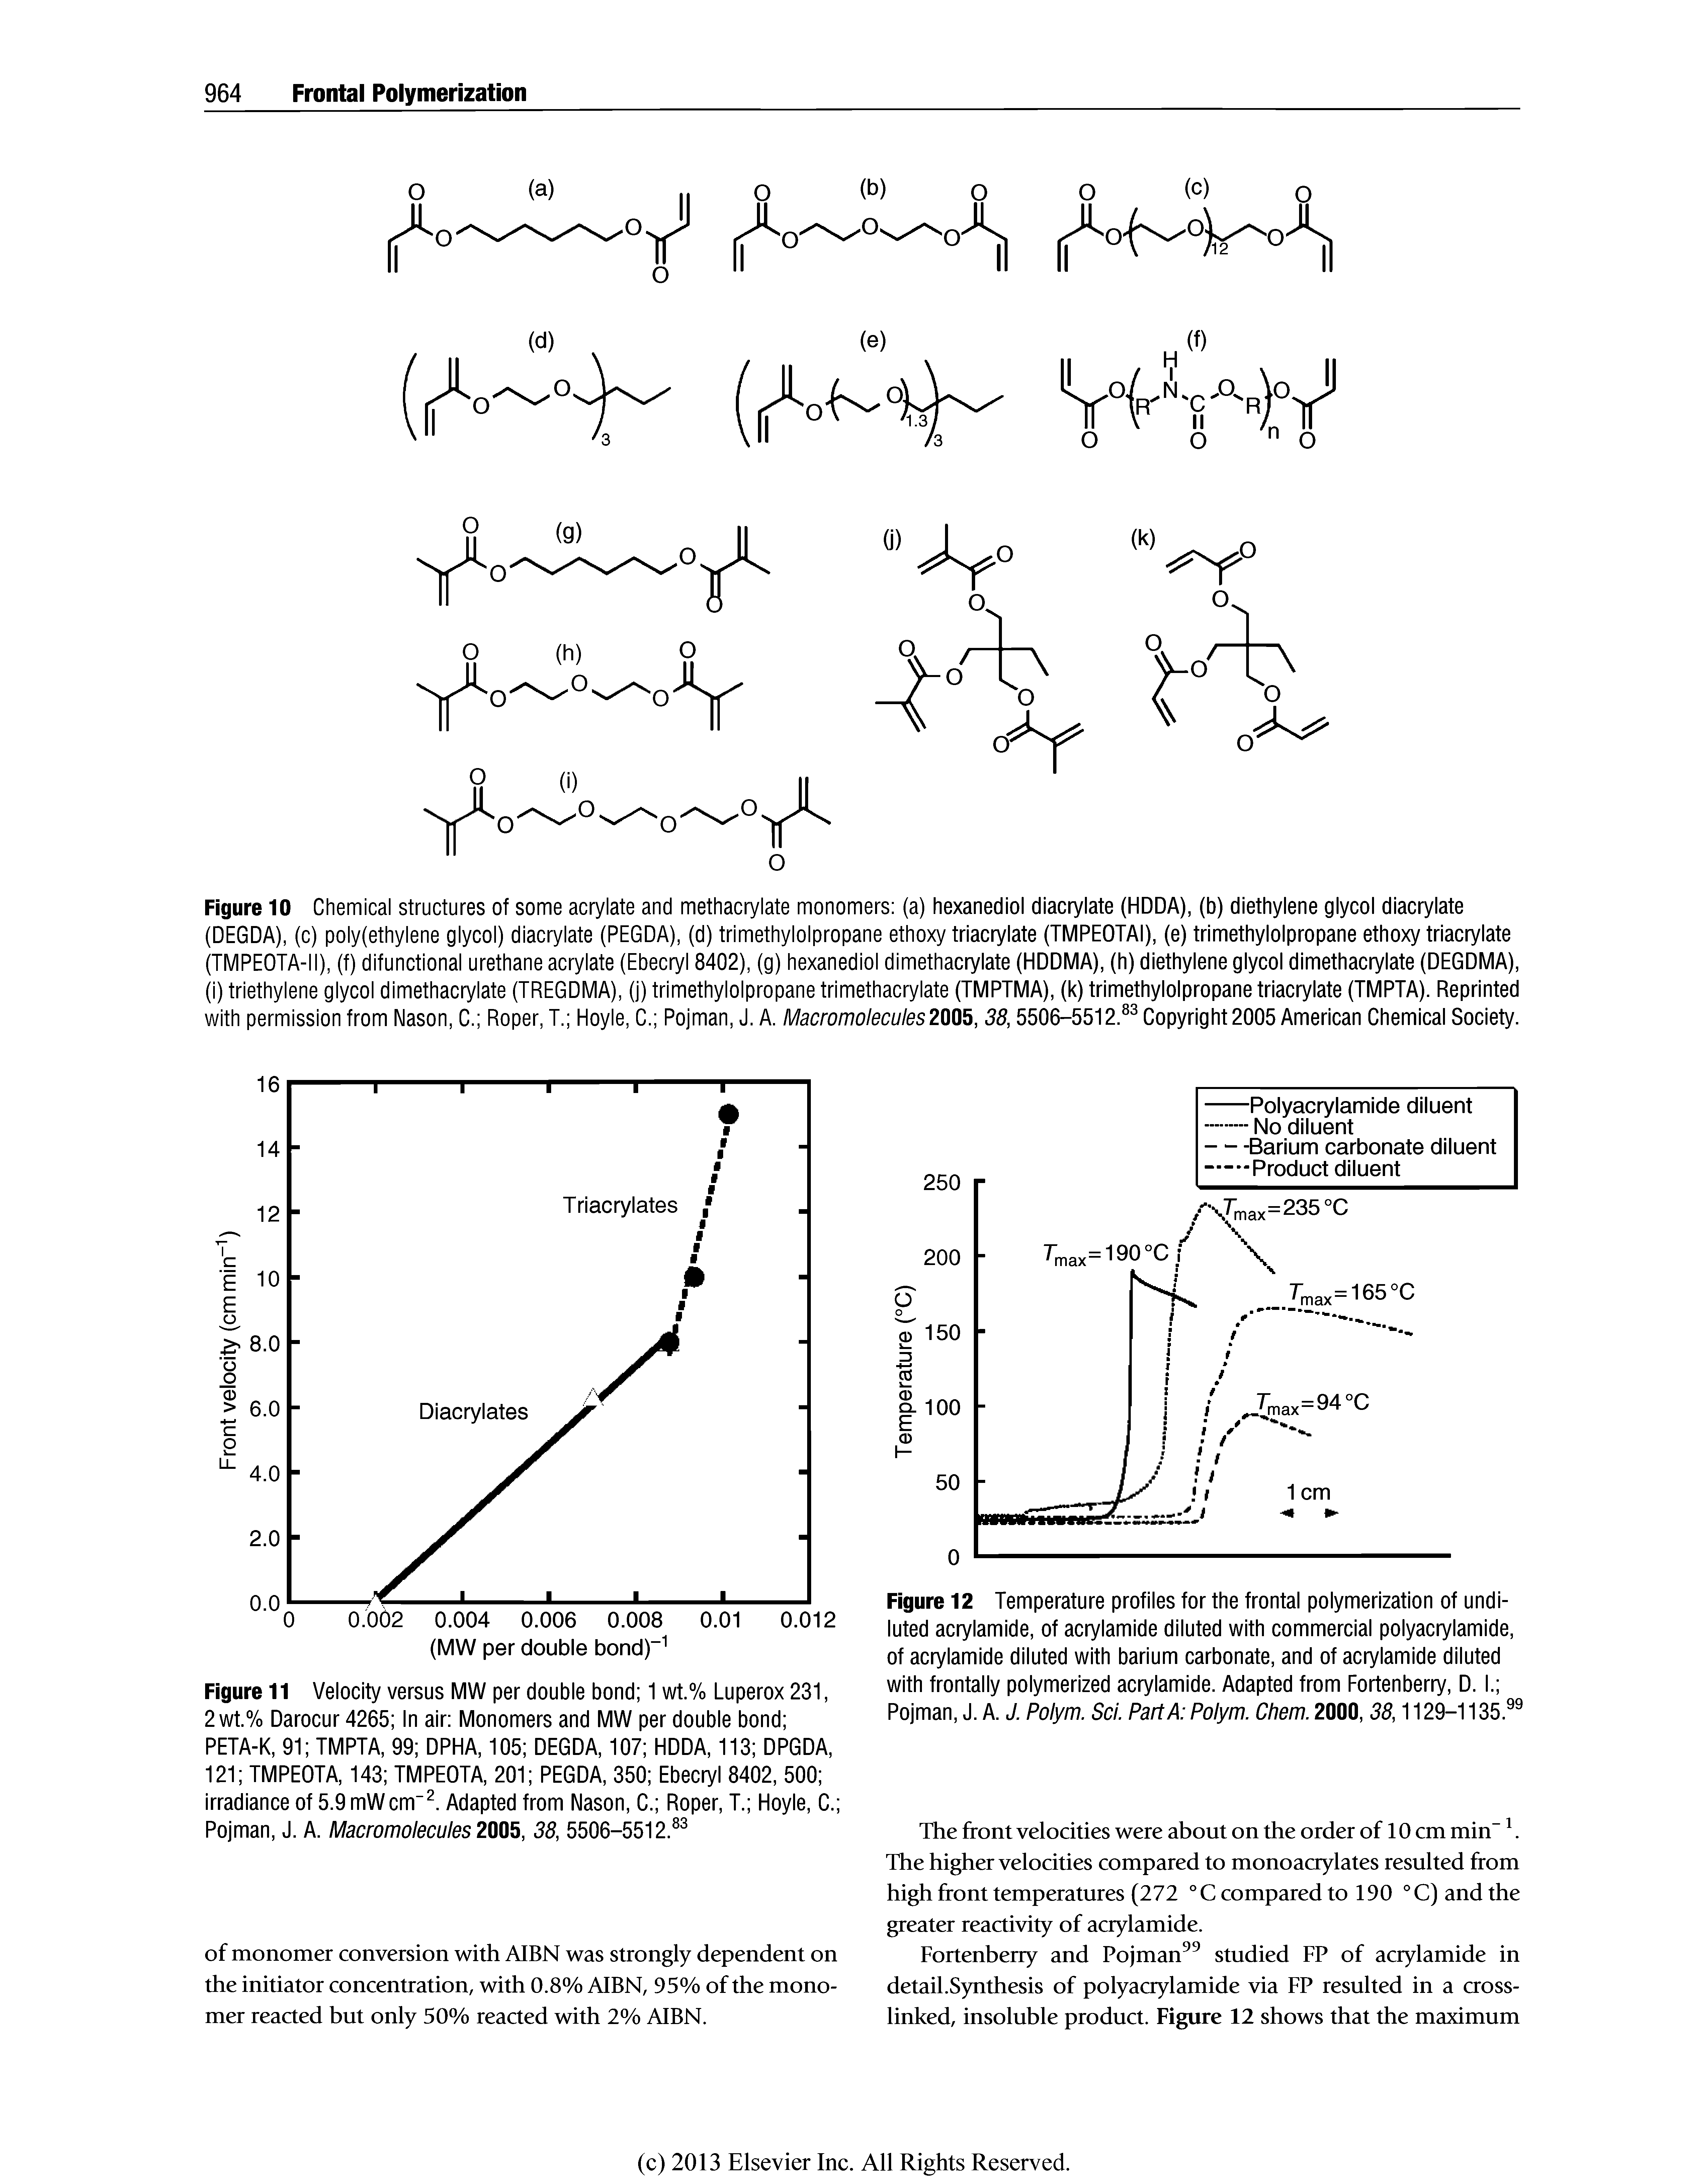 Figure 12 Temperature profiles for the frontal polymerization of undiluted acrylamide, of acrylamide diluted with commercial polyacrylamide, of acrylamide diluted with barium carbonate, and of acrylamide diluted with frontally polymerized acrylamide. Adapted from Fortenberry, D. I. Pojman, J. A. J. Polym. Sci. Part A Polym. Chem. 2000, 38,1129-1135. ...